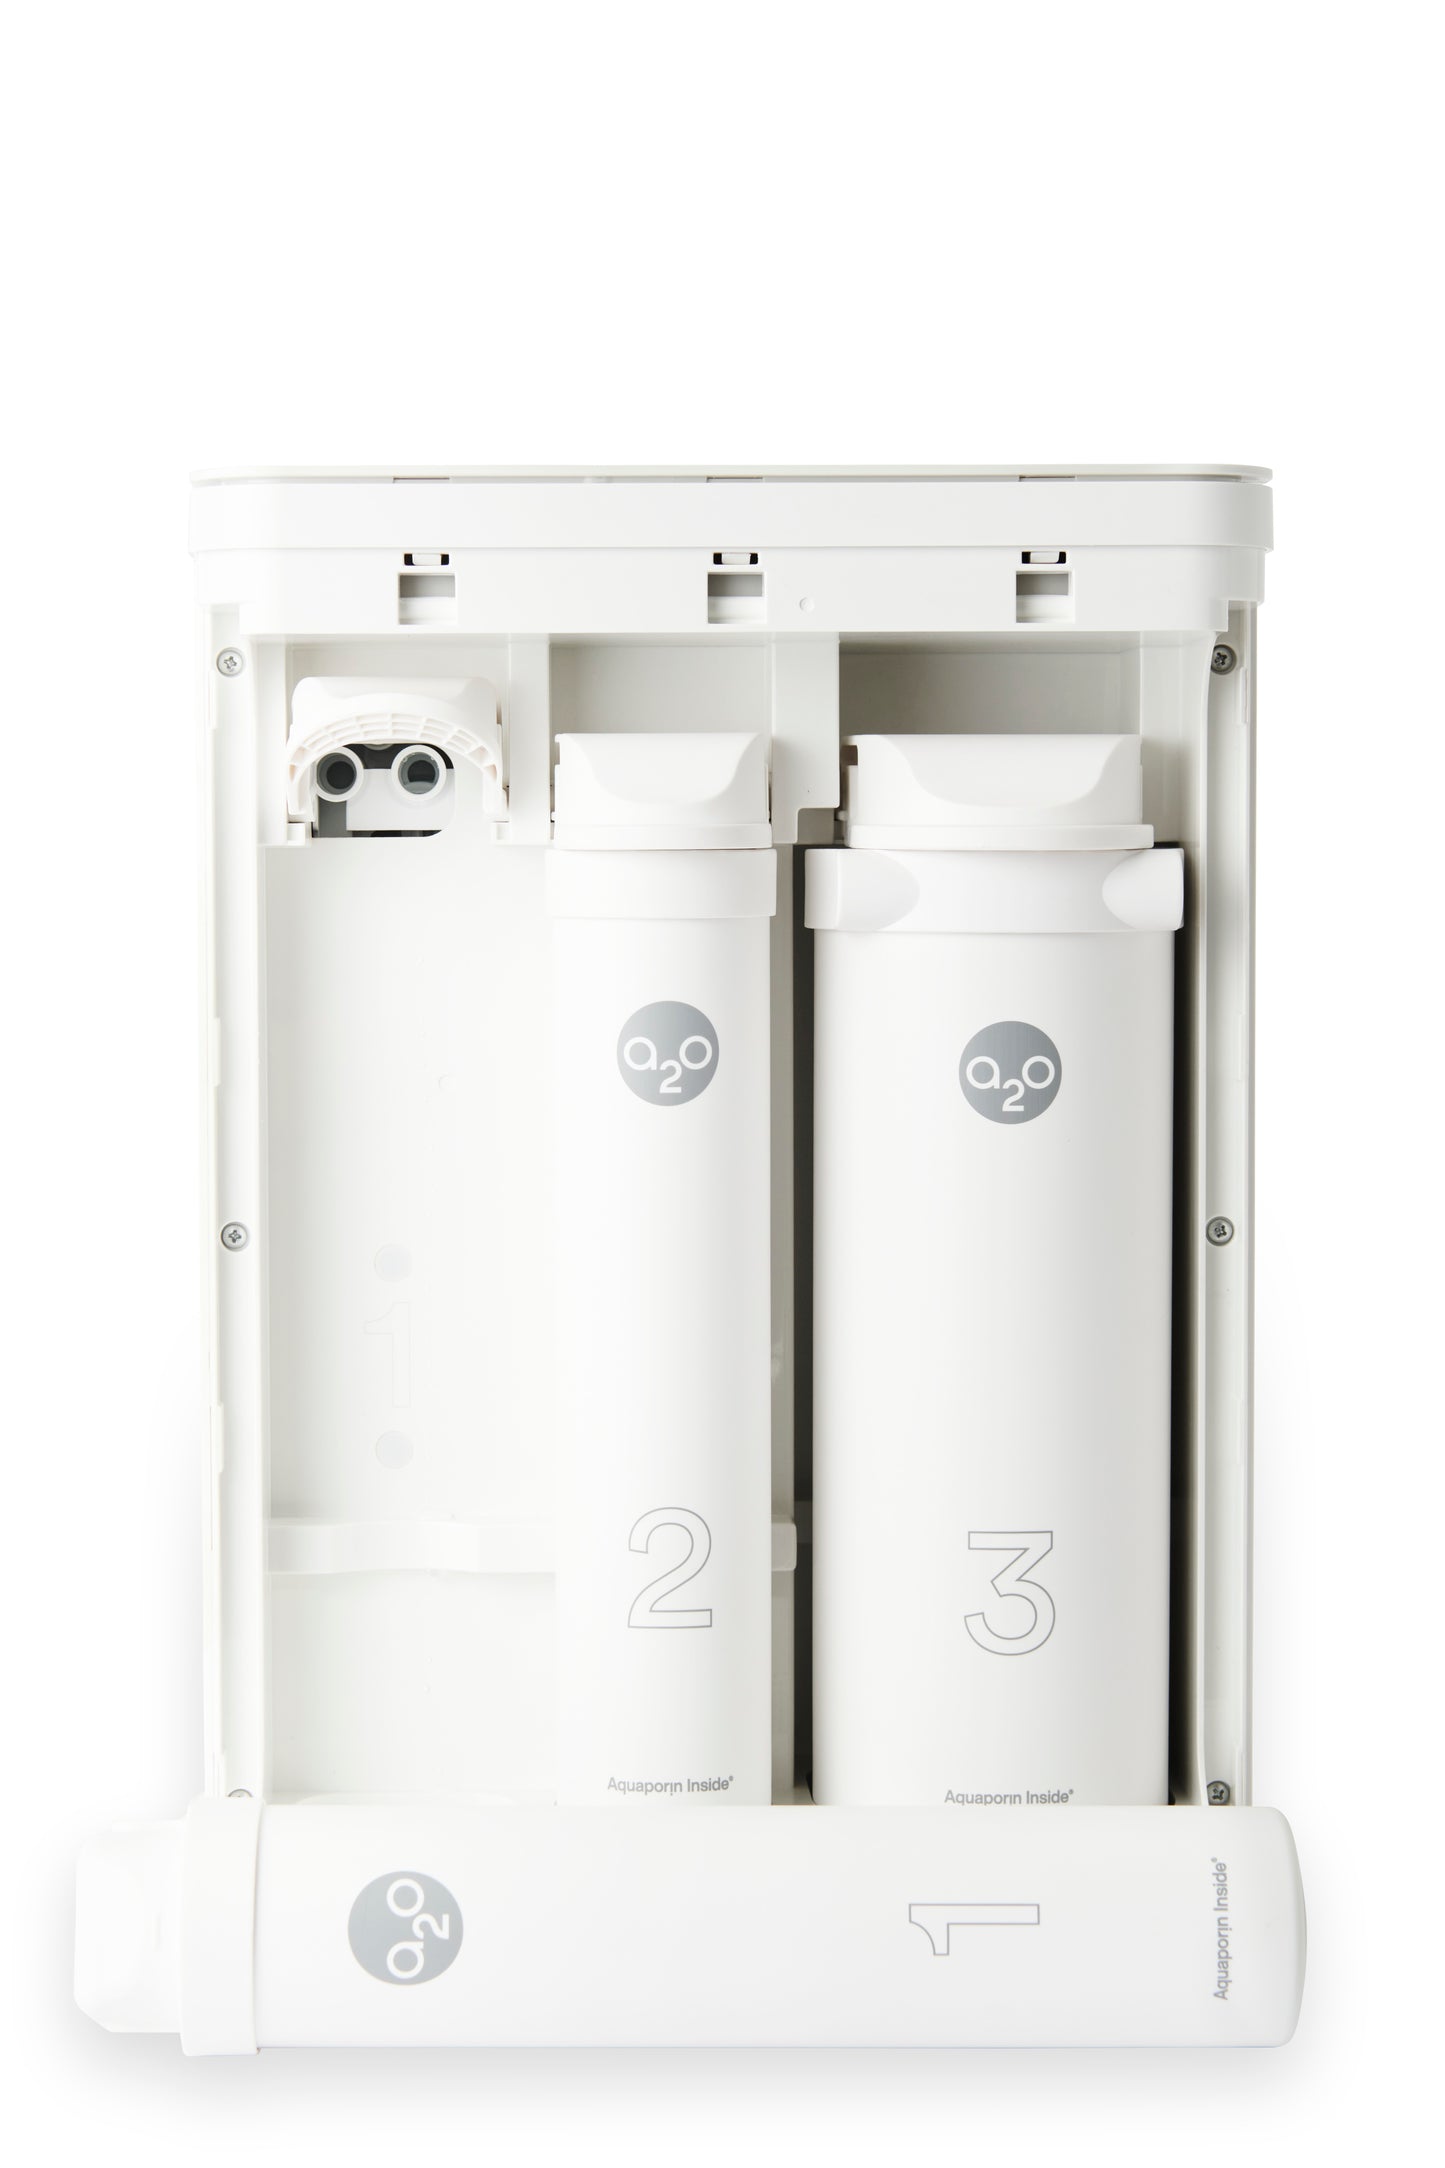 A2O Pure: New Zealand's Ultimate Home Water Purification System